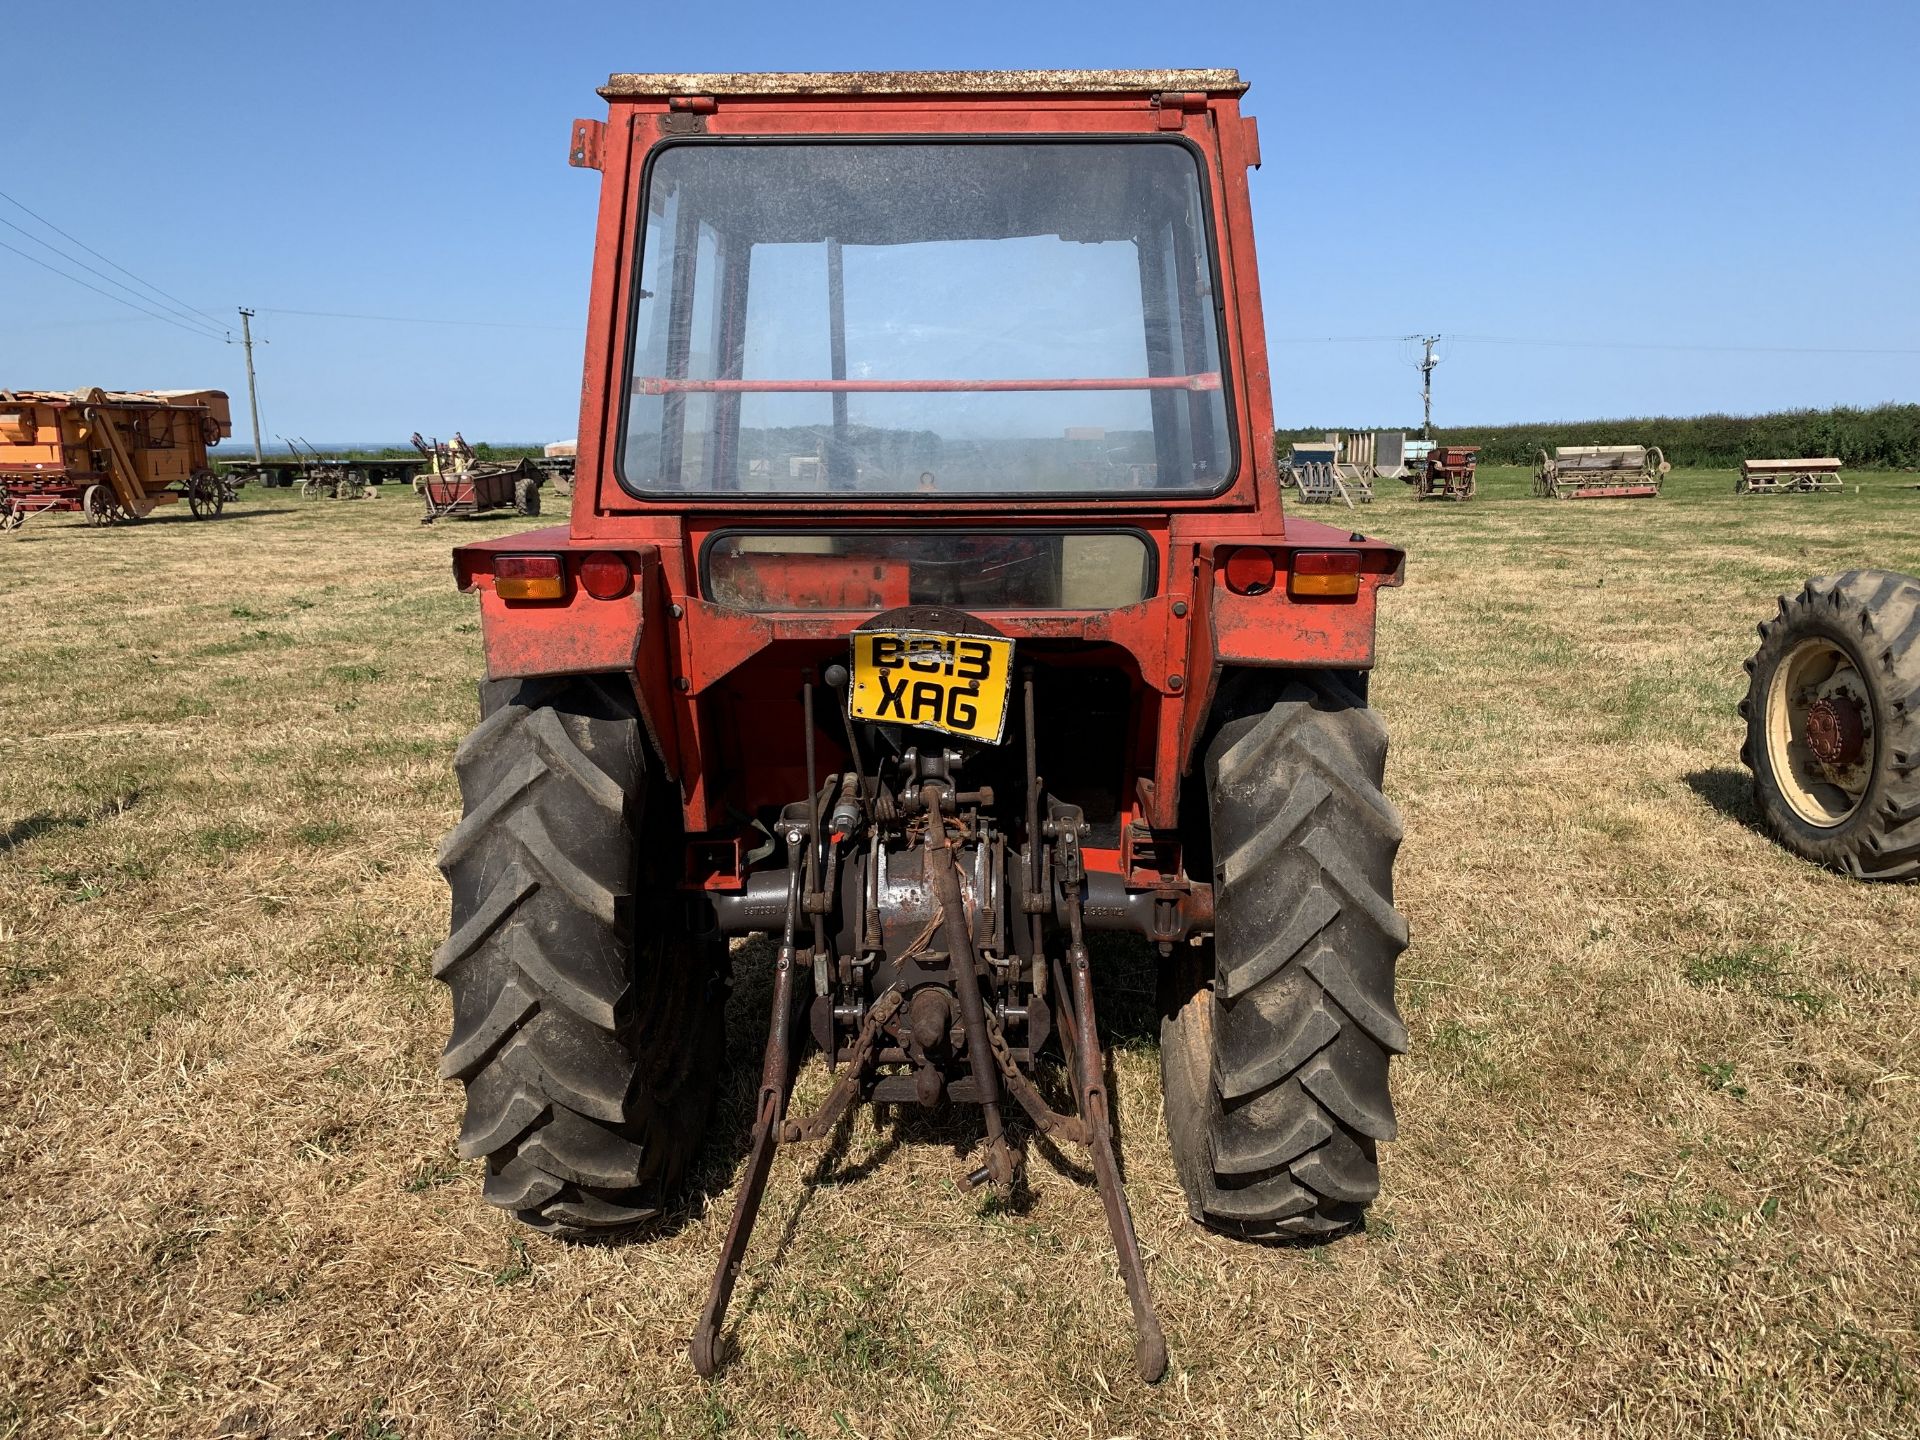 Massey Ferguson 230 tractor, B813 XAG, 3255 hours, with MF 75 front loader - Image 5 of 6